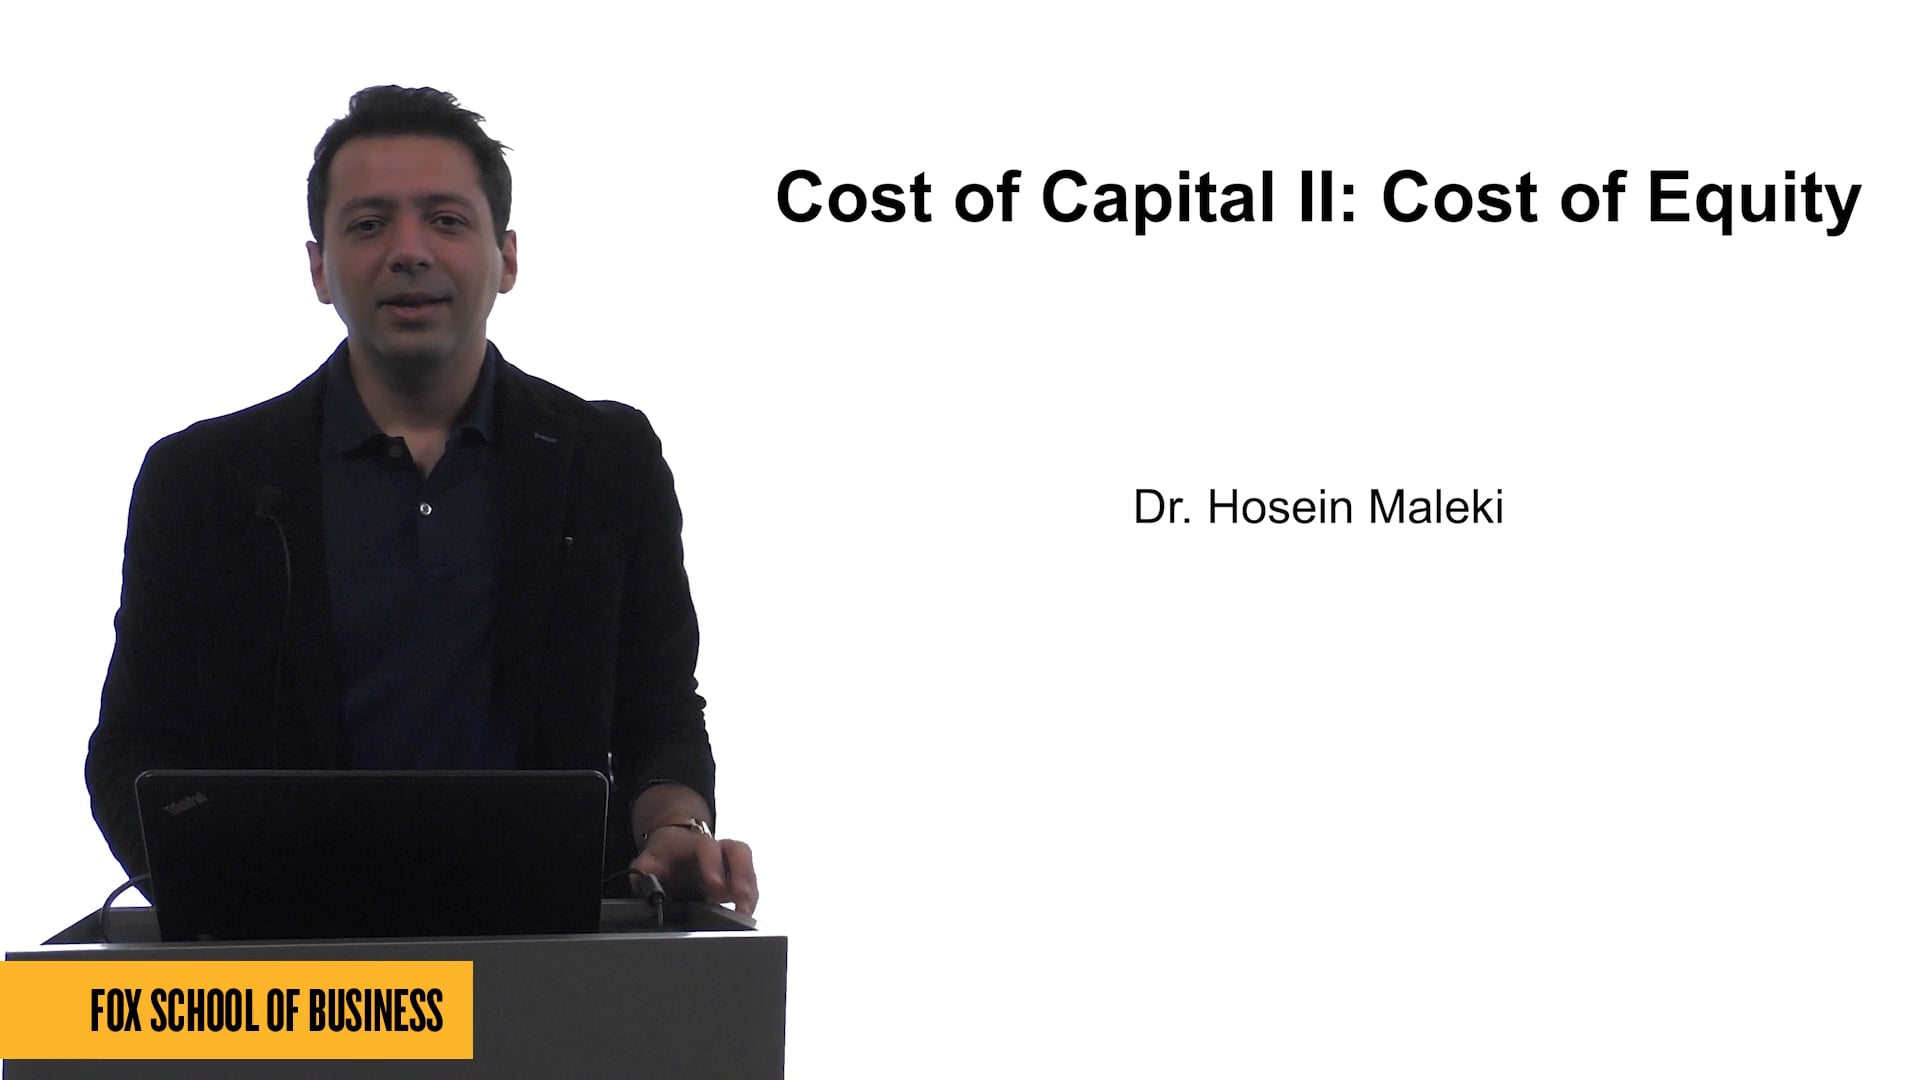 Cost of Capital II: Cost of Equity